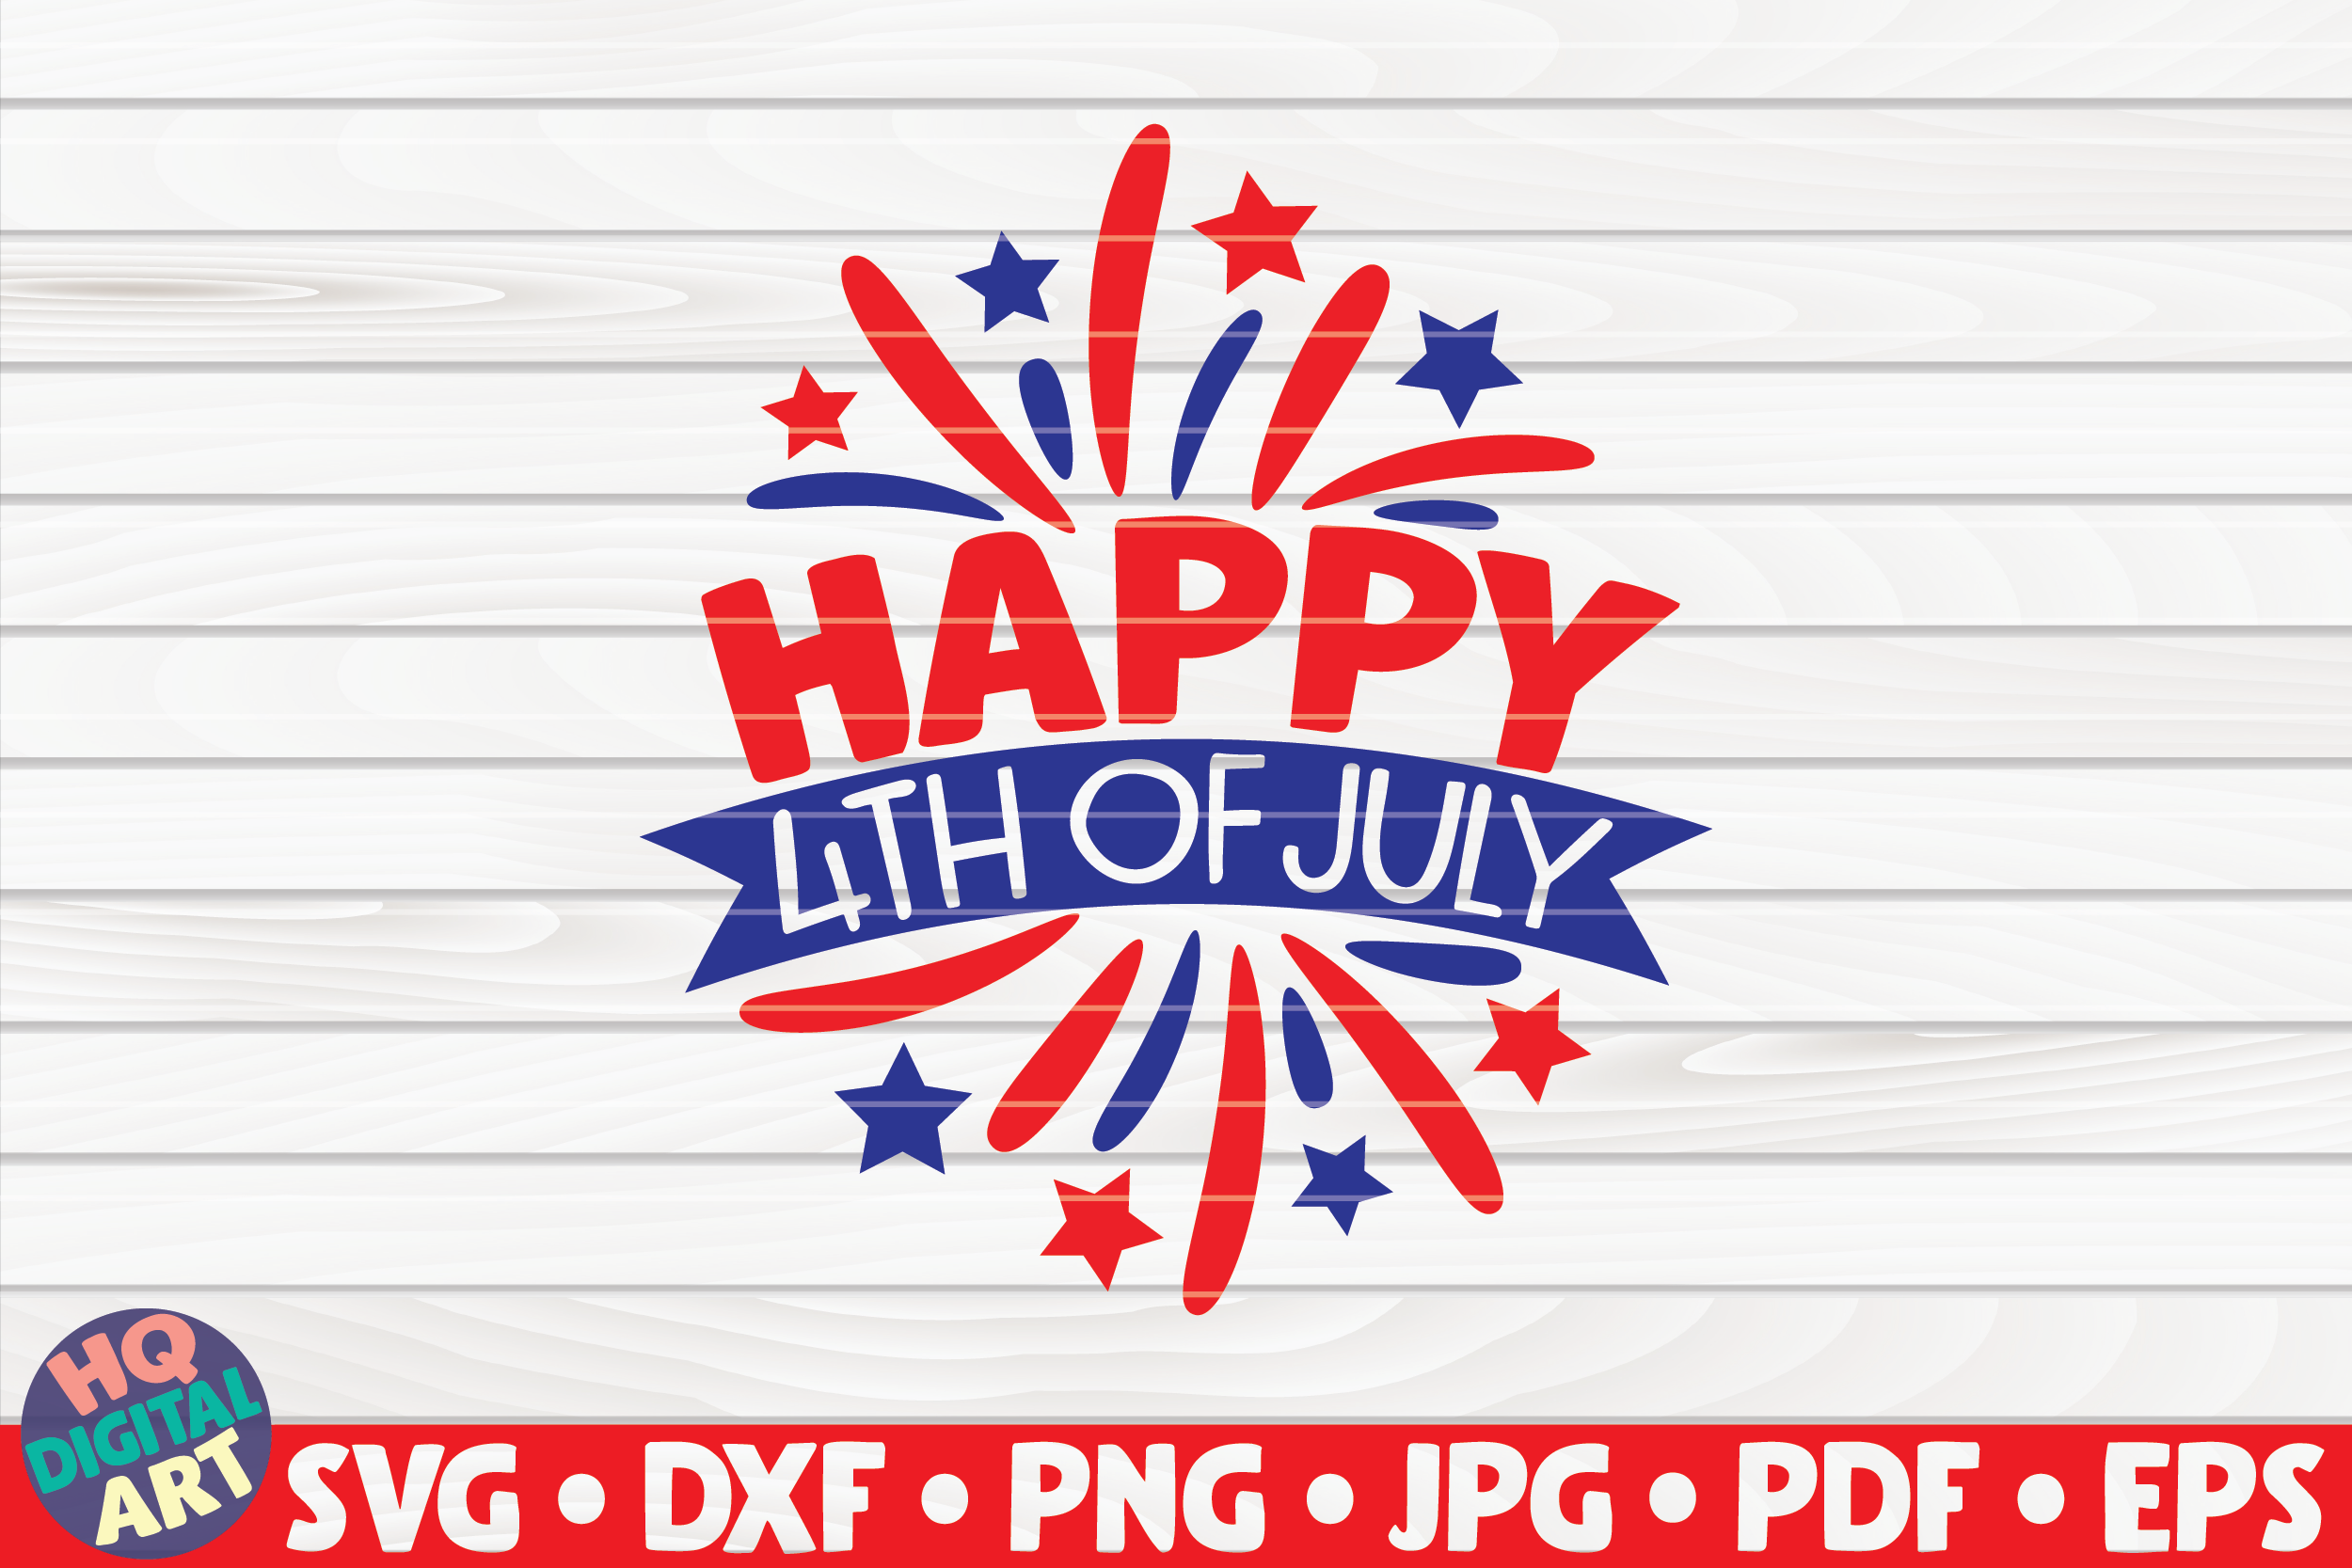 Happy 4th of July SVG | 4th of July Quote By HQDigitalArt